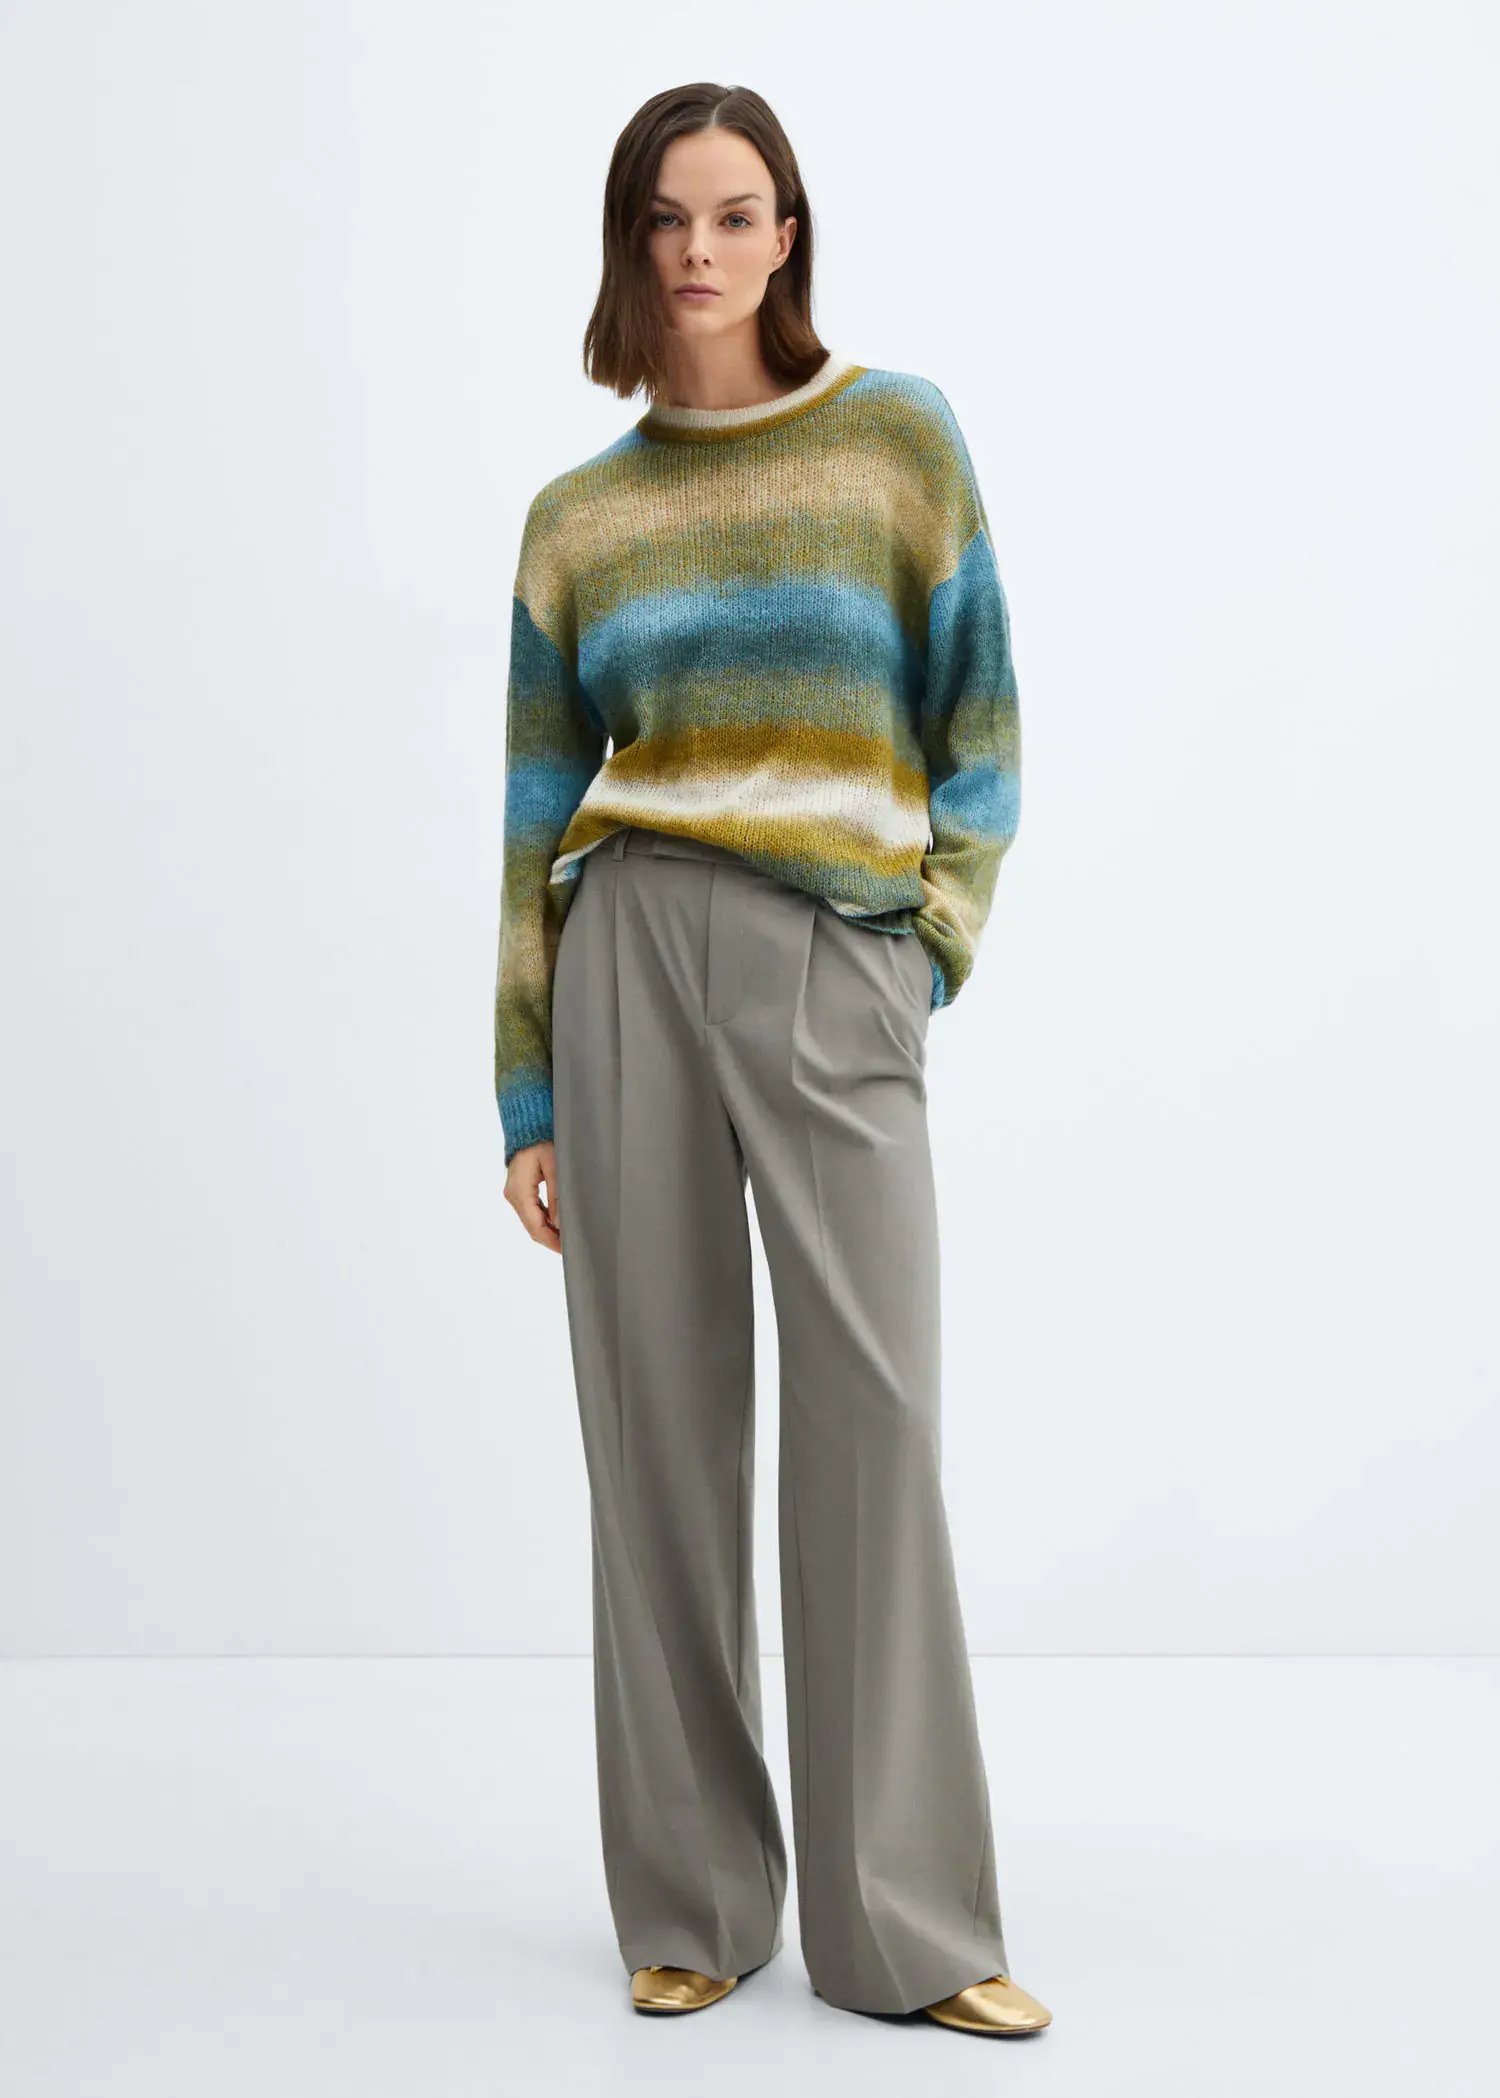 Mango Degraded knitted sweater. 2